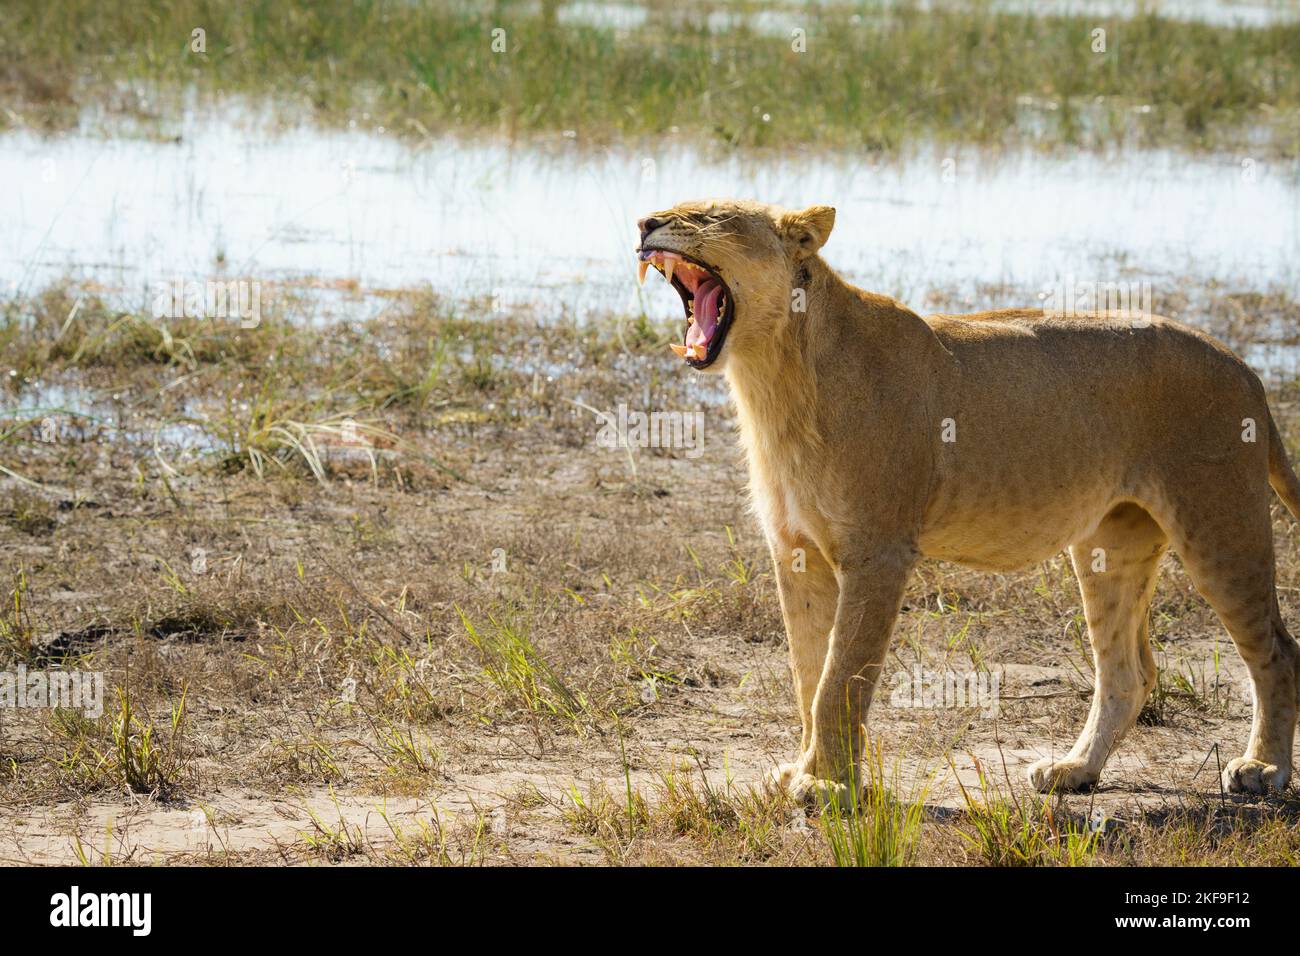 Lioness roar, Panthera leo, side view with mouth wide open. Chobe River's edge. Chobe National Park, Botswana, Africa Stock Photo